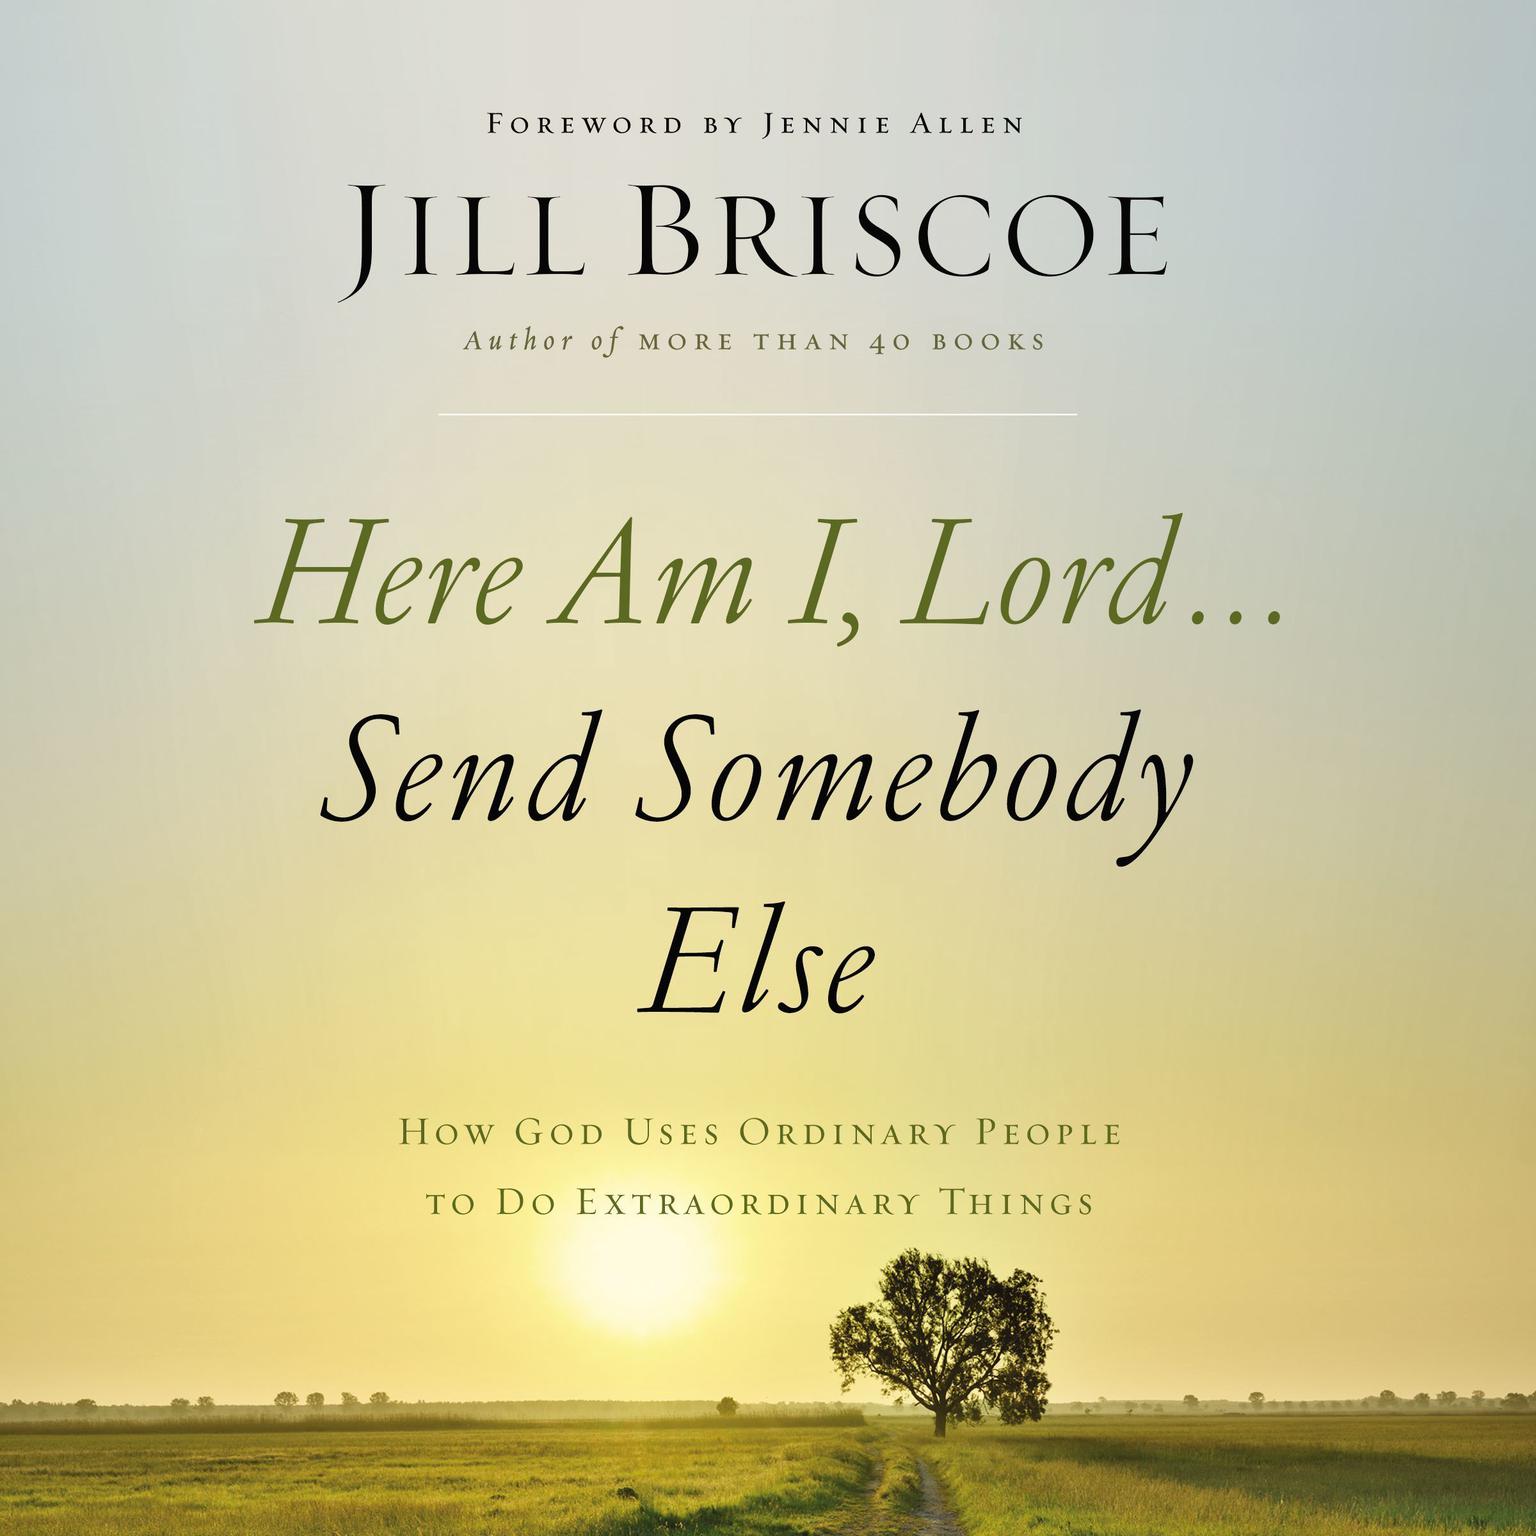 Here Am I, Lord...Send Somebody Else: How God Uses Ordinary People to Do Extraordinary Things Audiobook, by Jill Briscoe